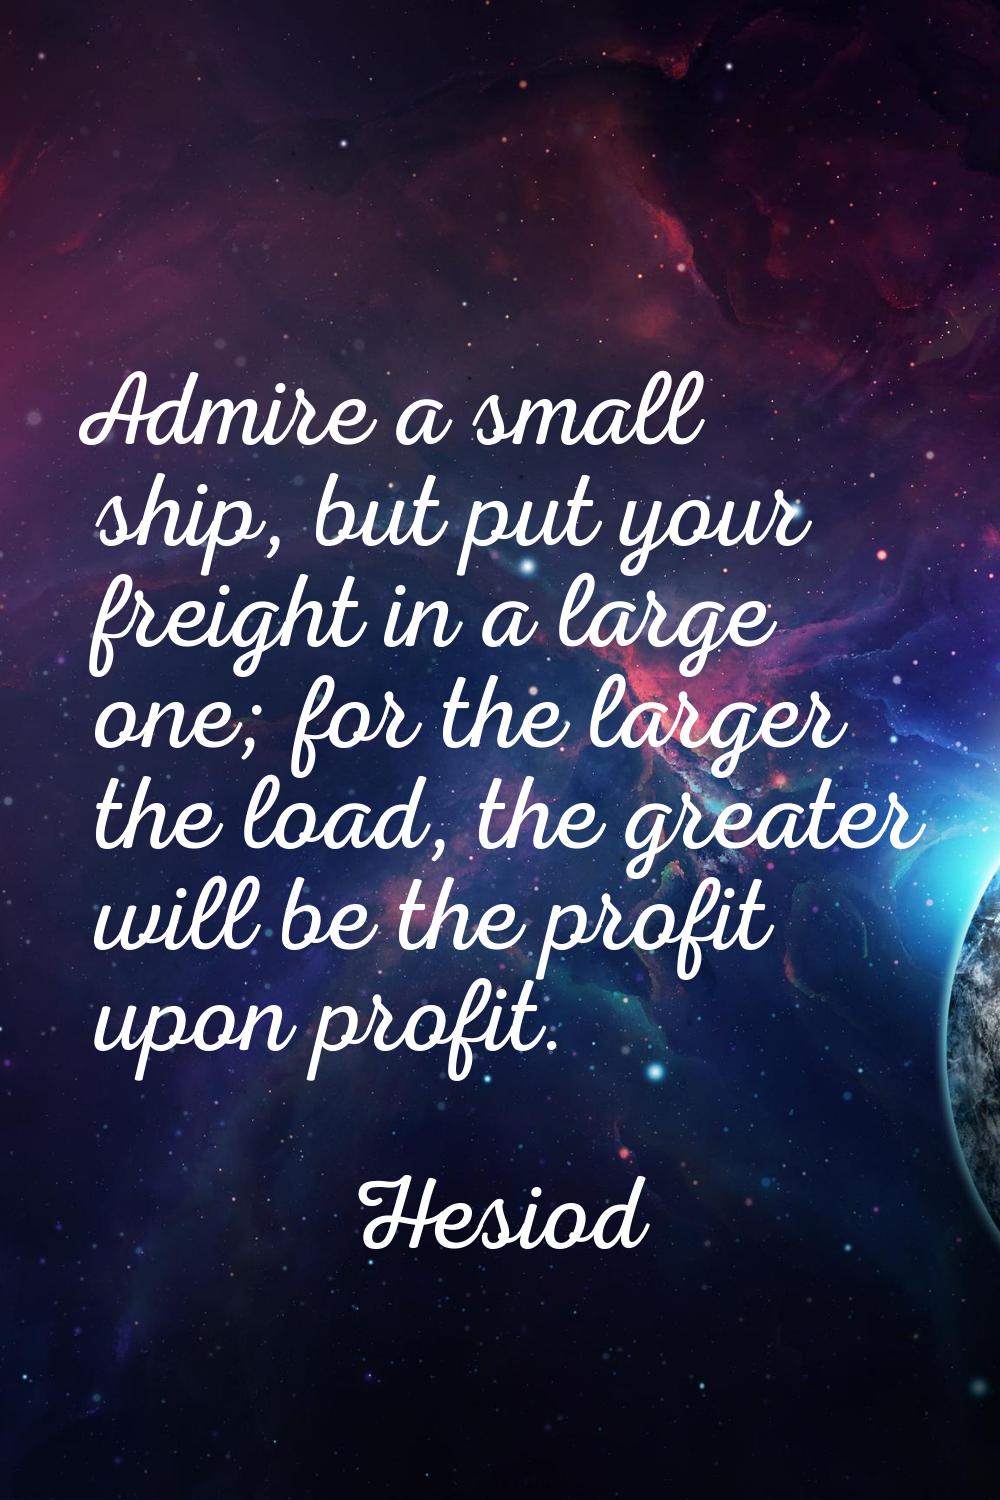 Admire a small ship, but put your freight in a large one; for the larger the load, the greater will